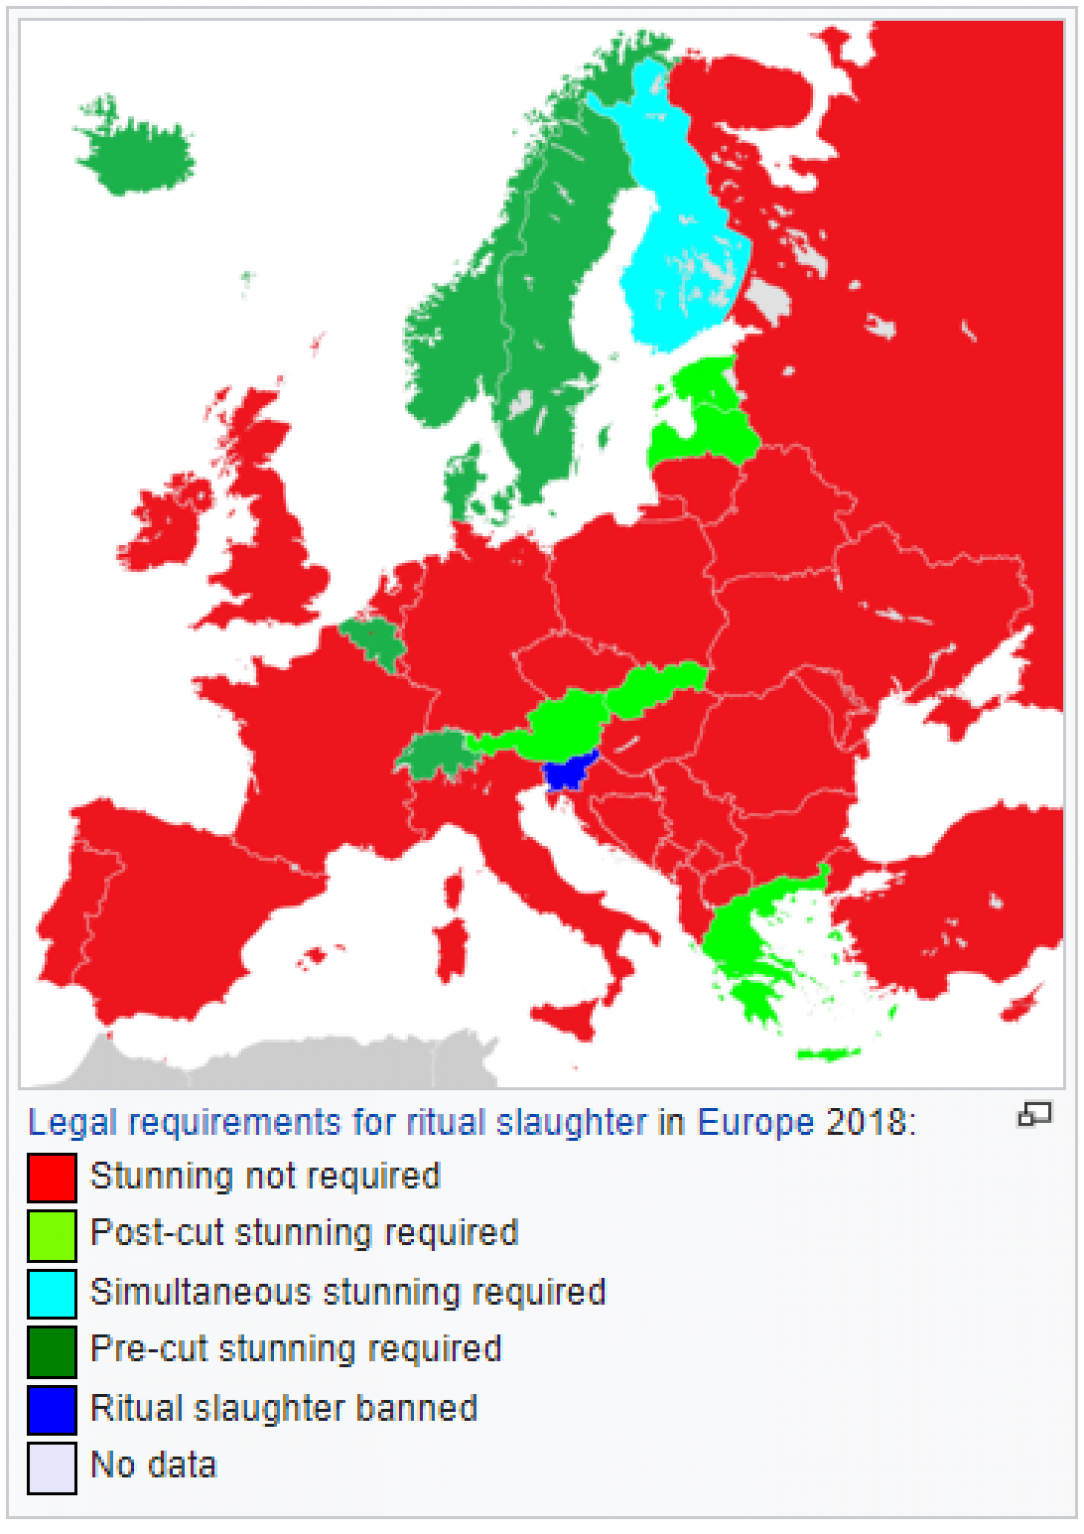 Legal requirements for halal slaughter in Europe. (2018 map)